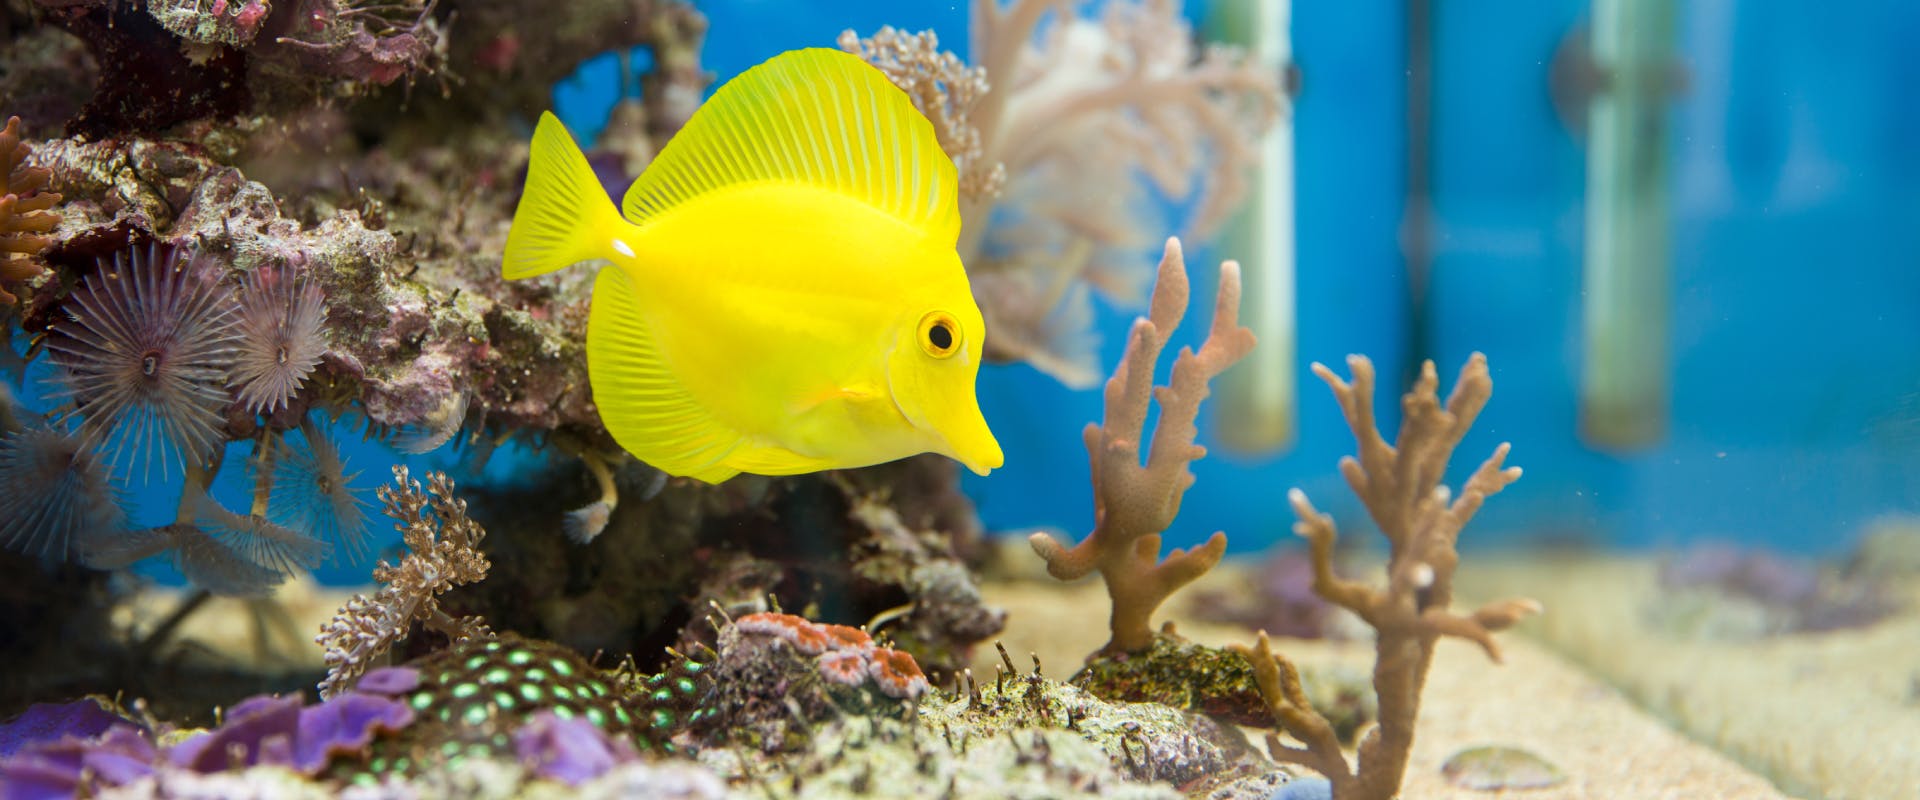 a yellow angel fish swimming above some pieces of coral in a fish tank